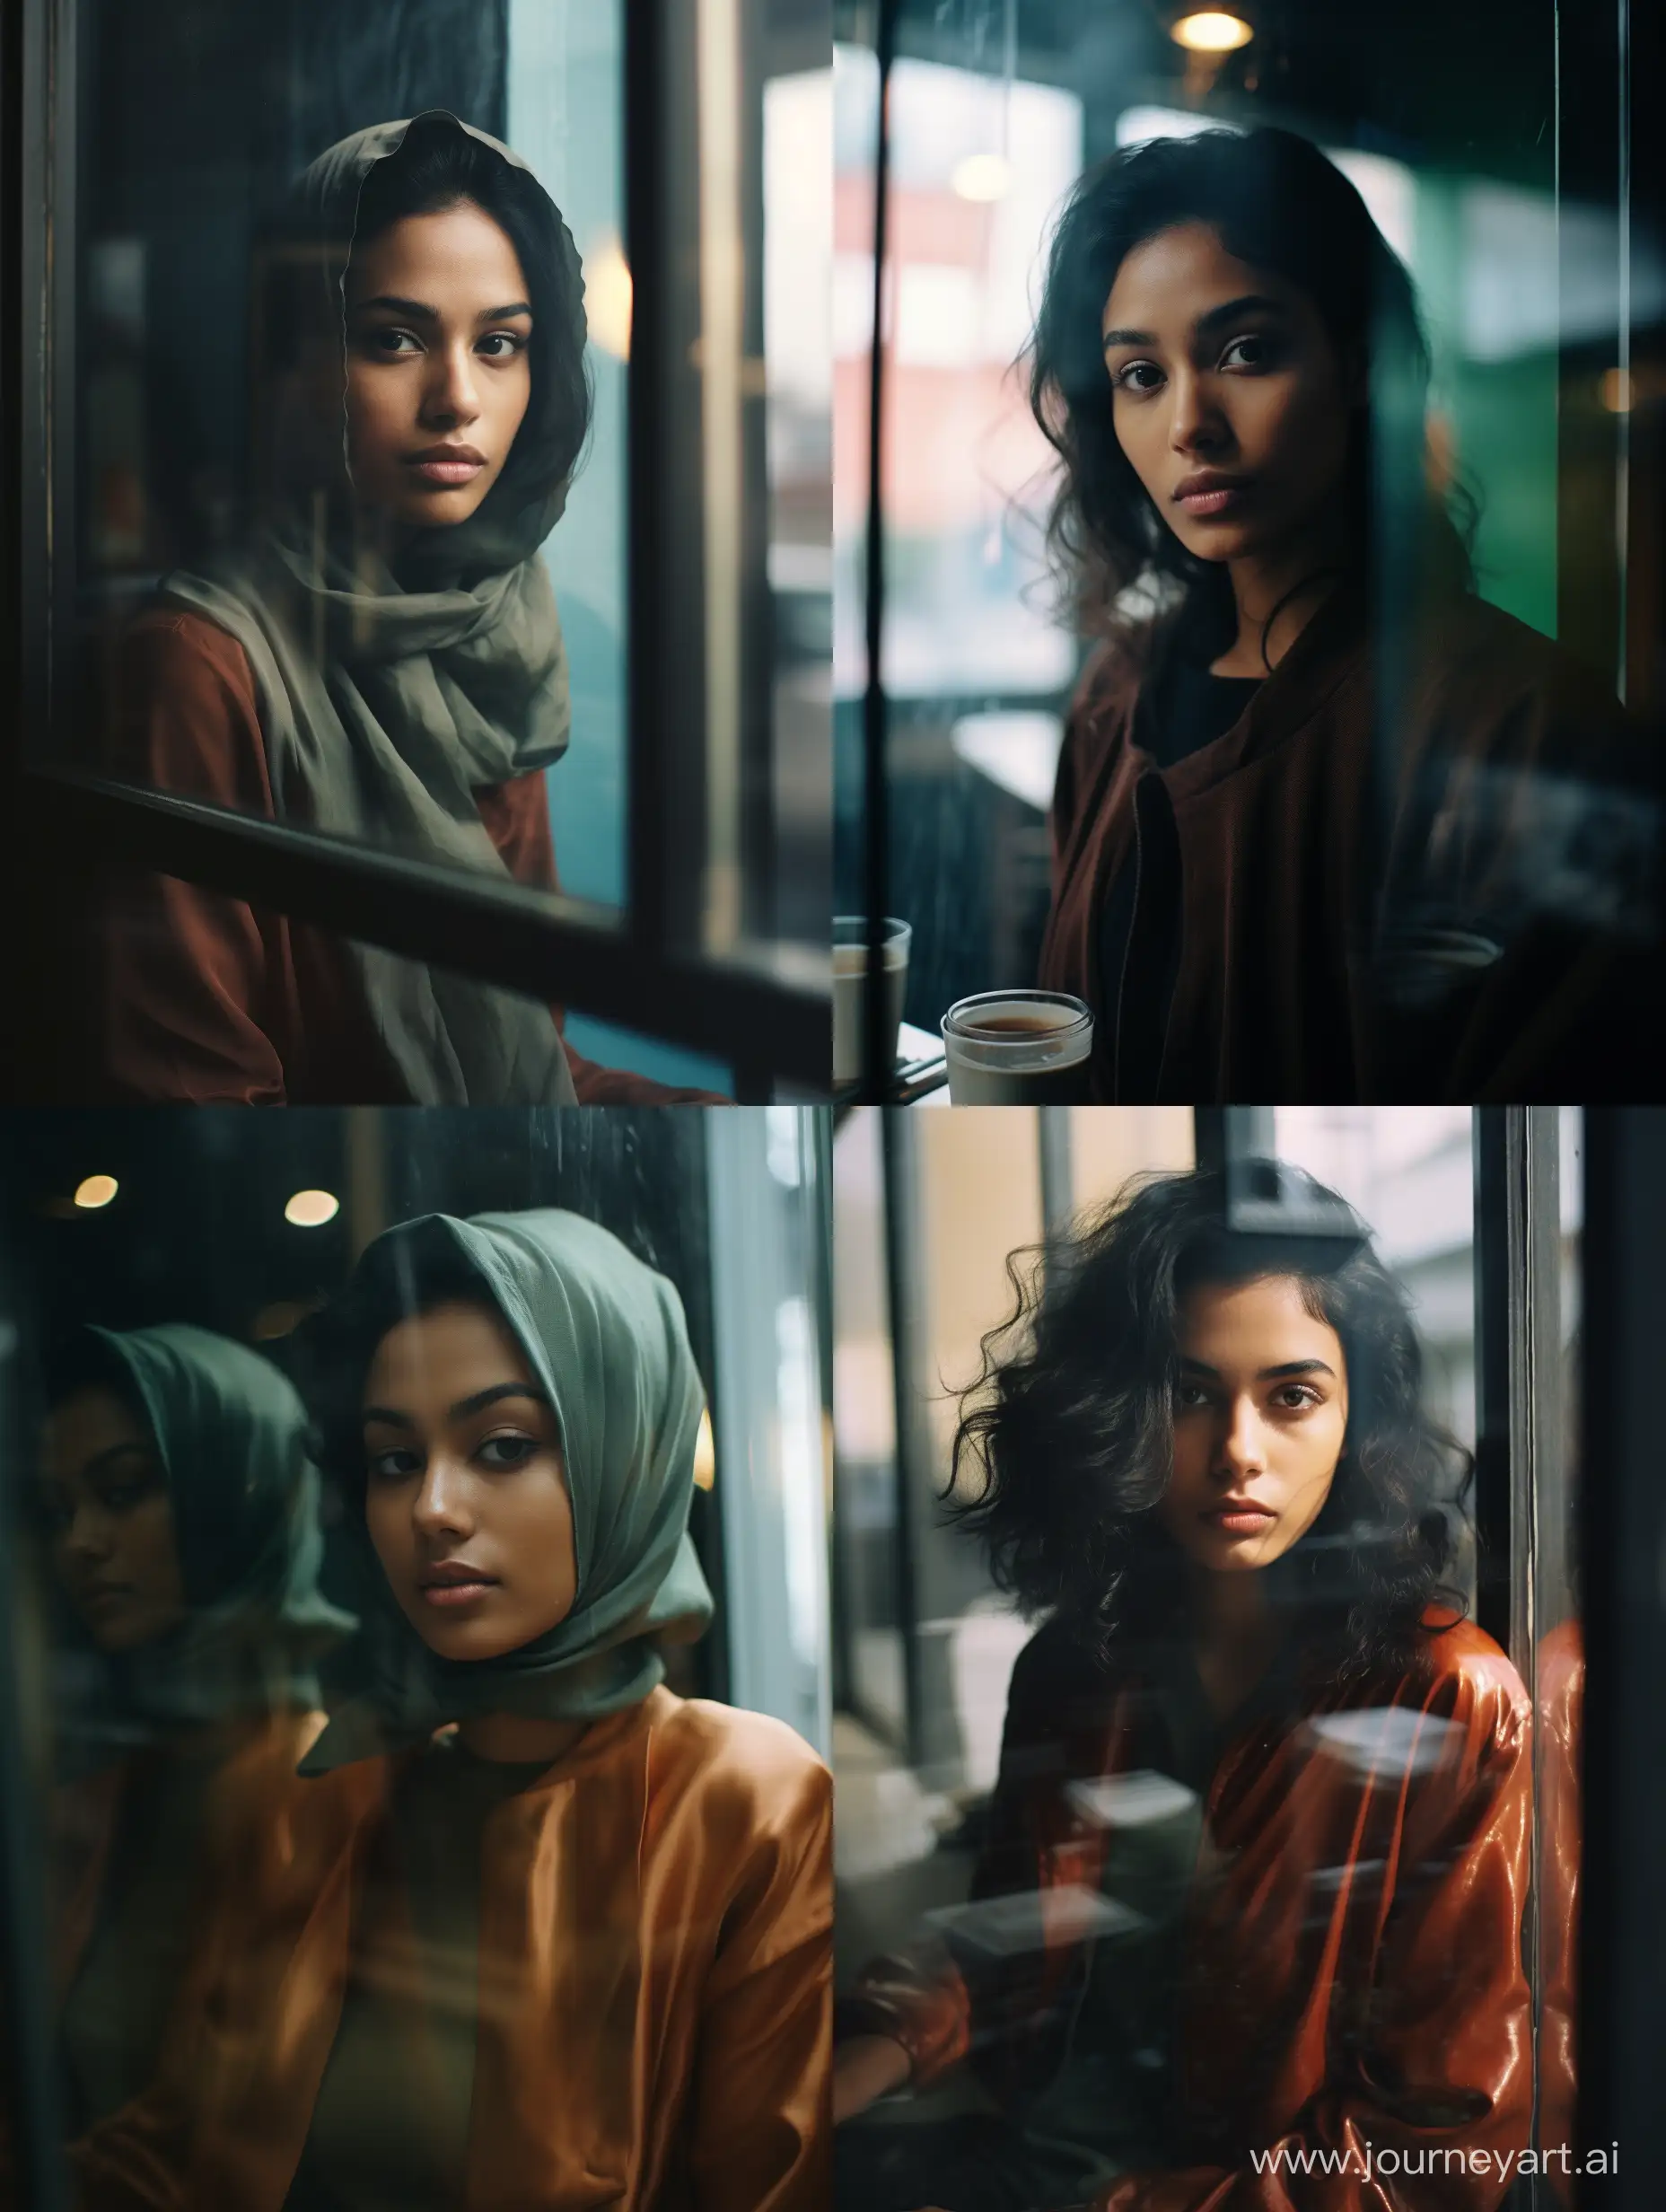 Moody-Portrait-of-a-22YearOld-Bangladeshi-Lady-in-a-Modern-City-Cafe